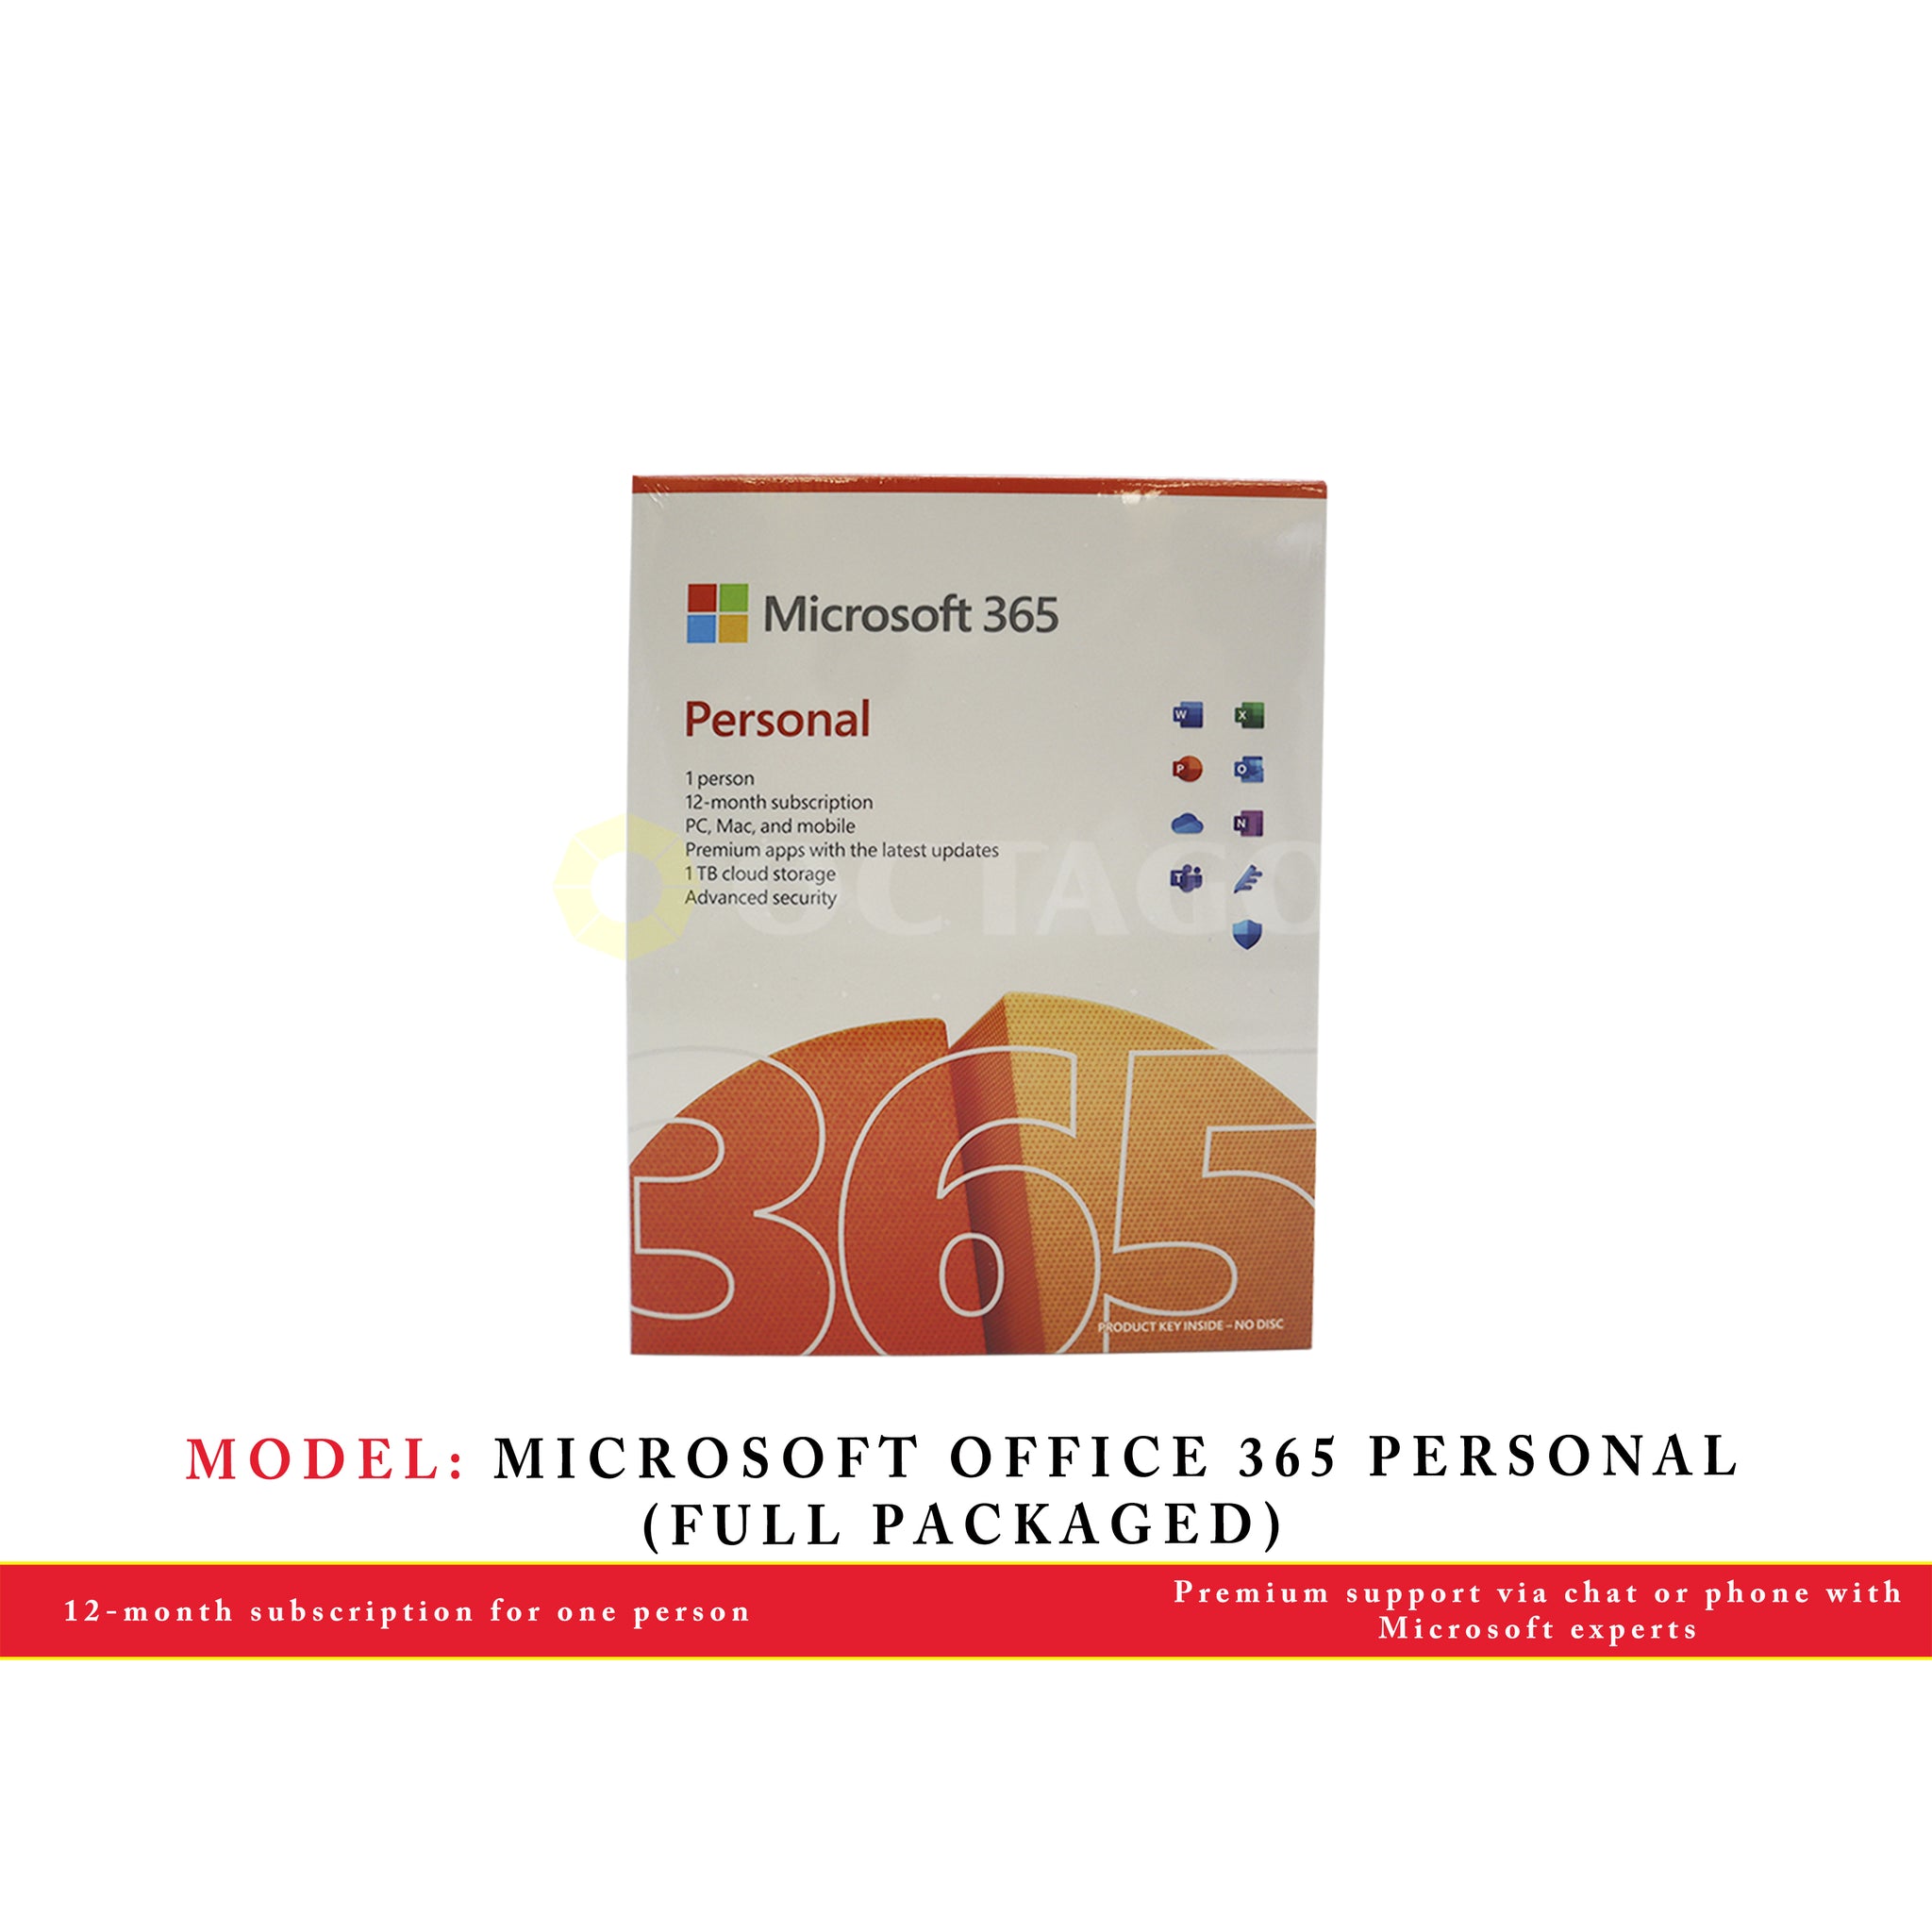 MS OFFICE 365 PERSONAL